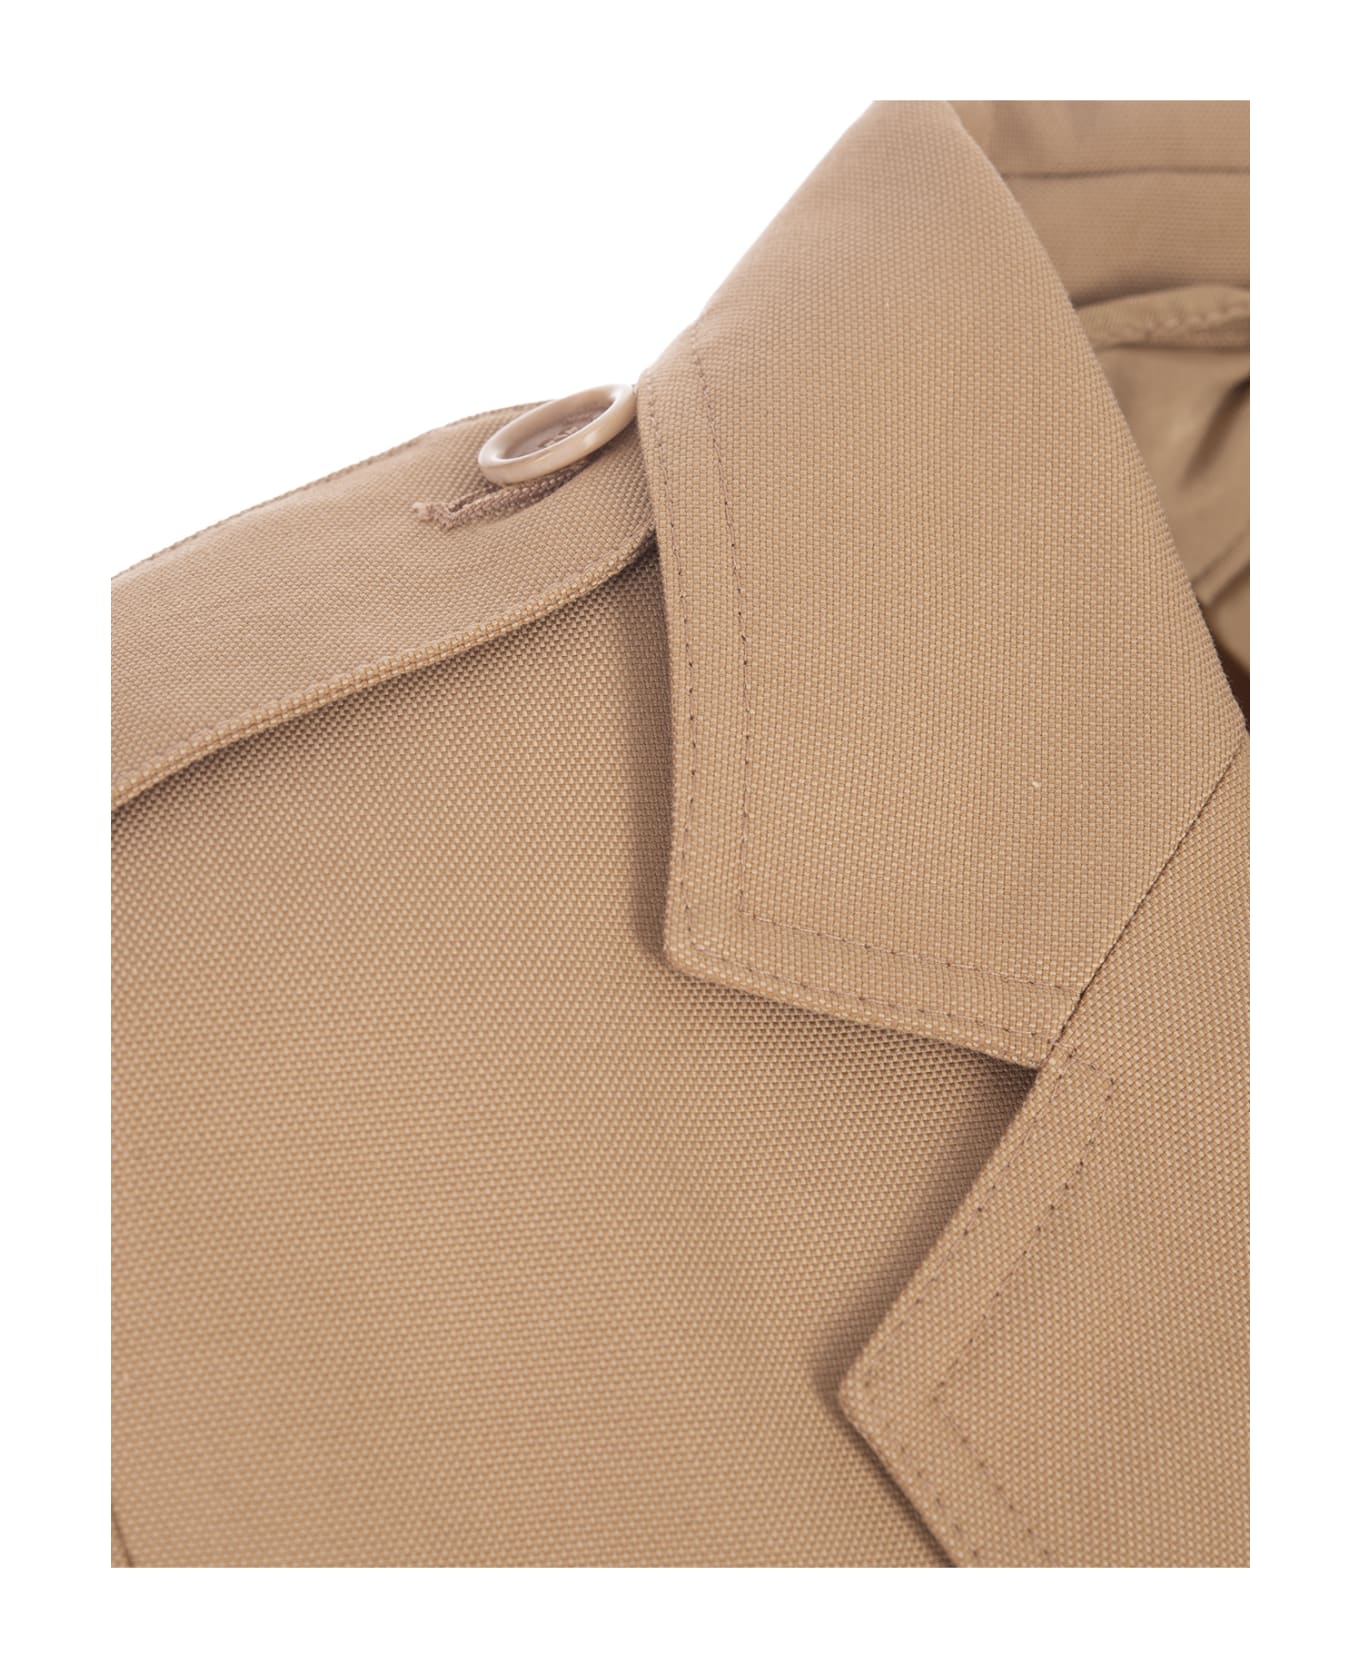 Max Mara Light Brown Pacos Jacket - Cuoio